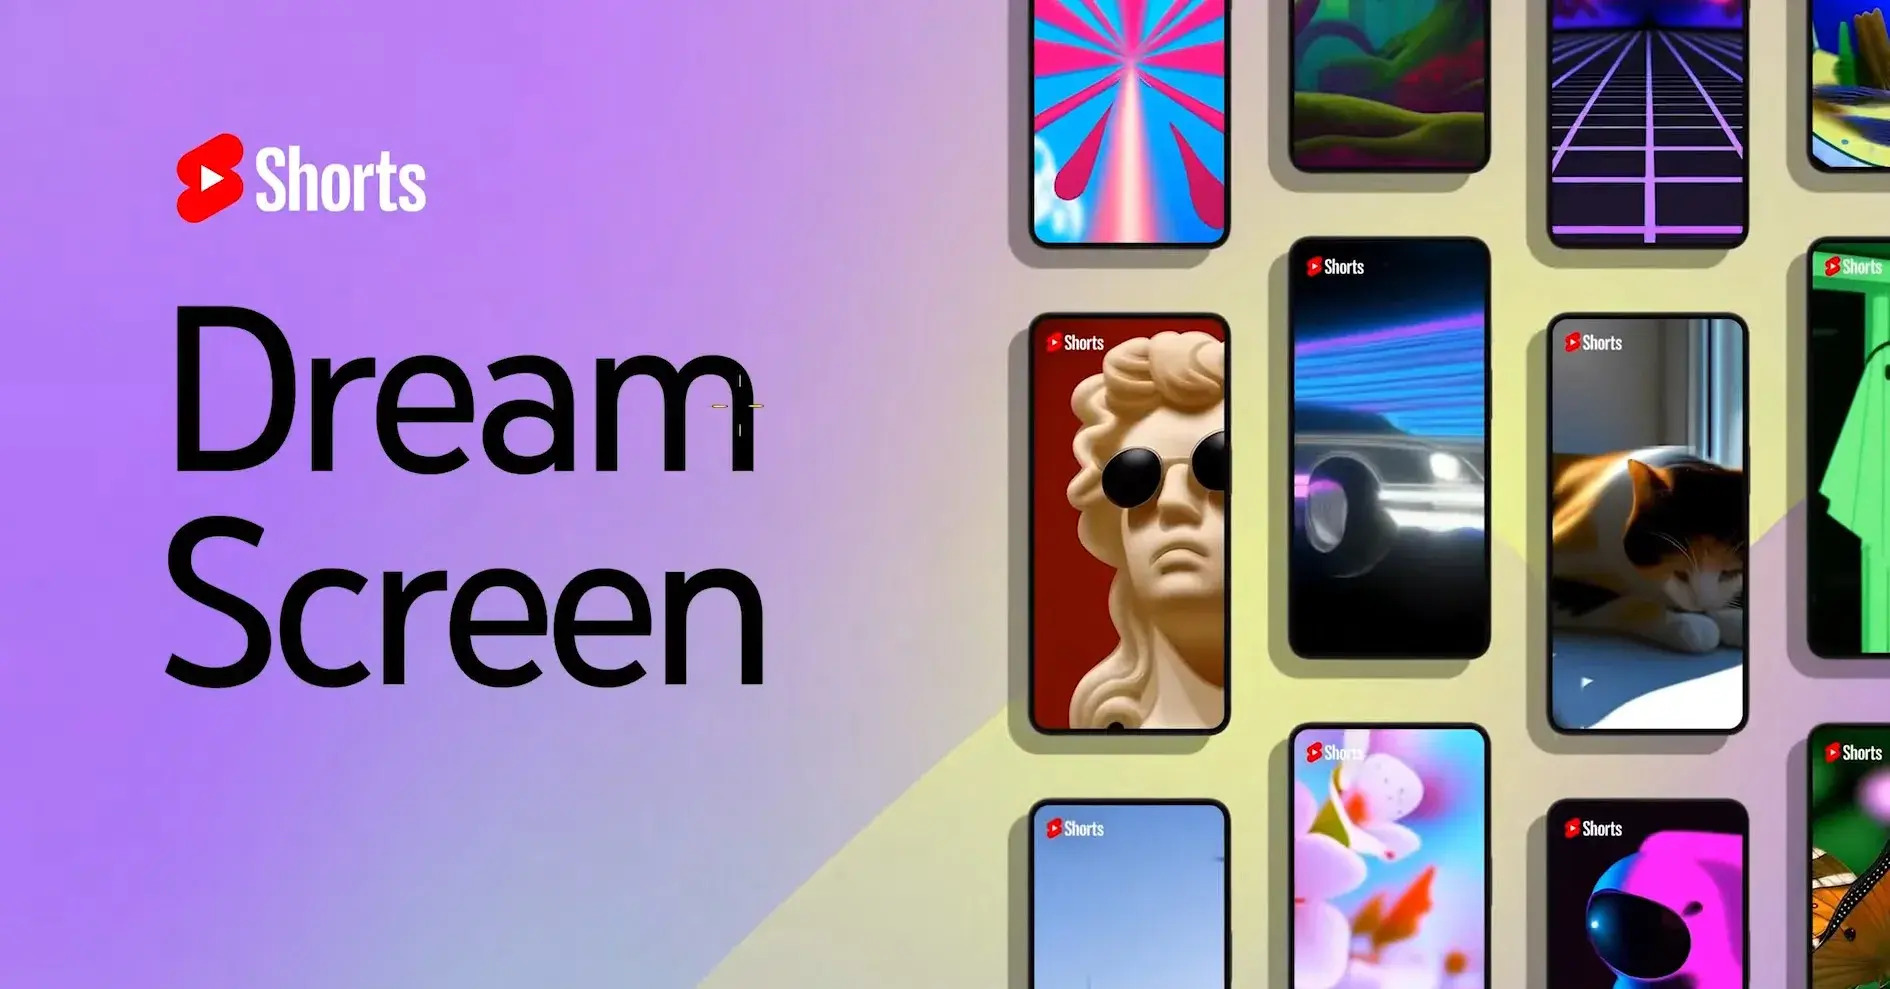 New Feature “Dream Screen” Coming To YouTube Shorts